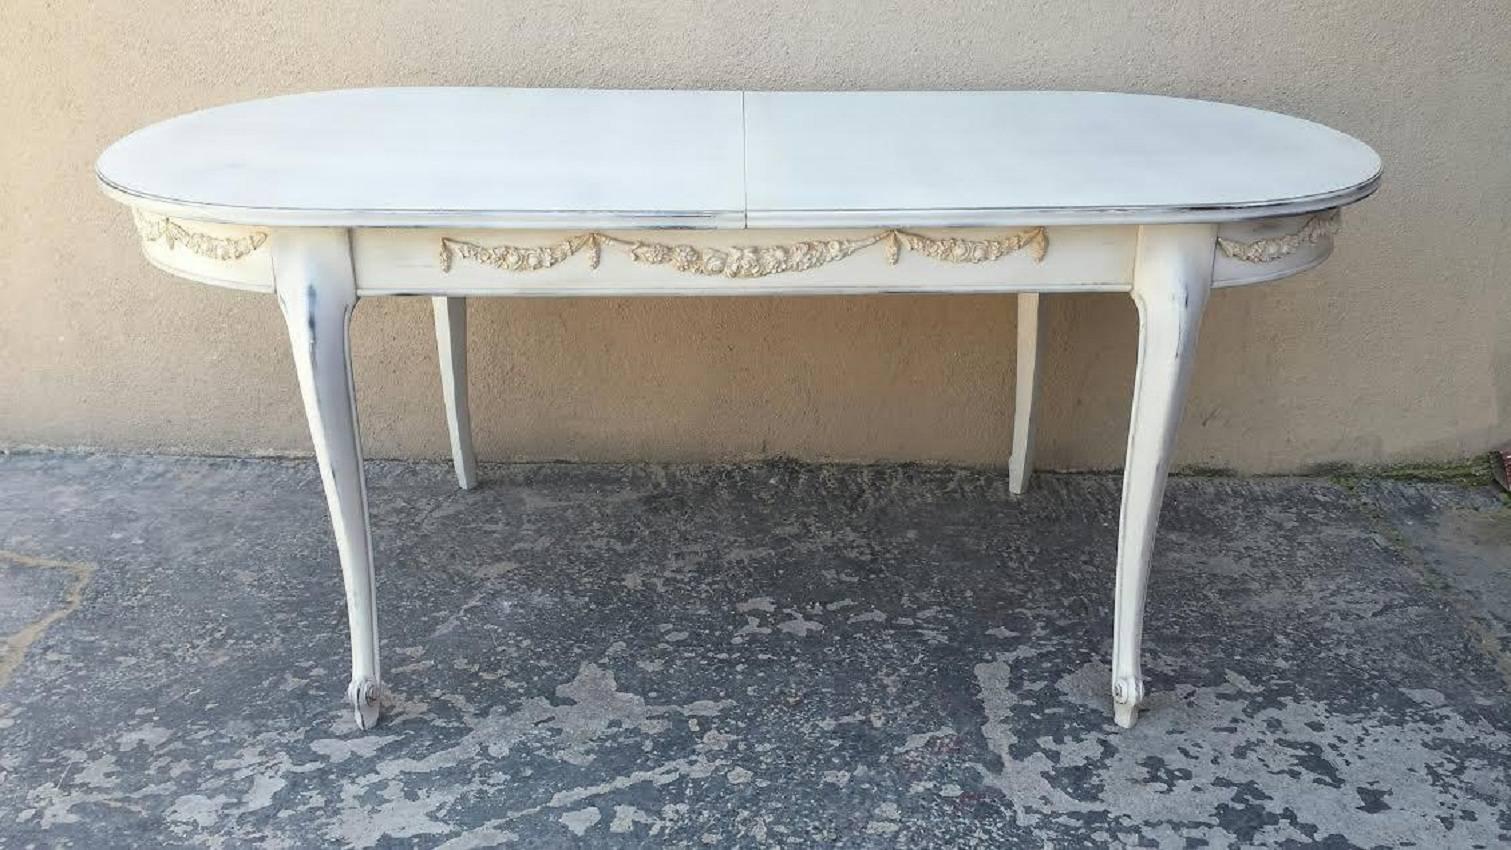 French Country painted white dining table with extension leaf. French antique shabby chic finish.
Dimensions: With leaf W 90